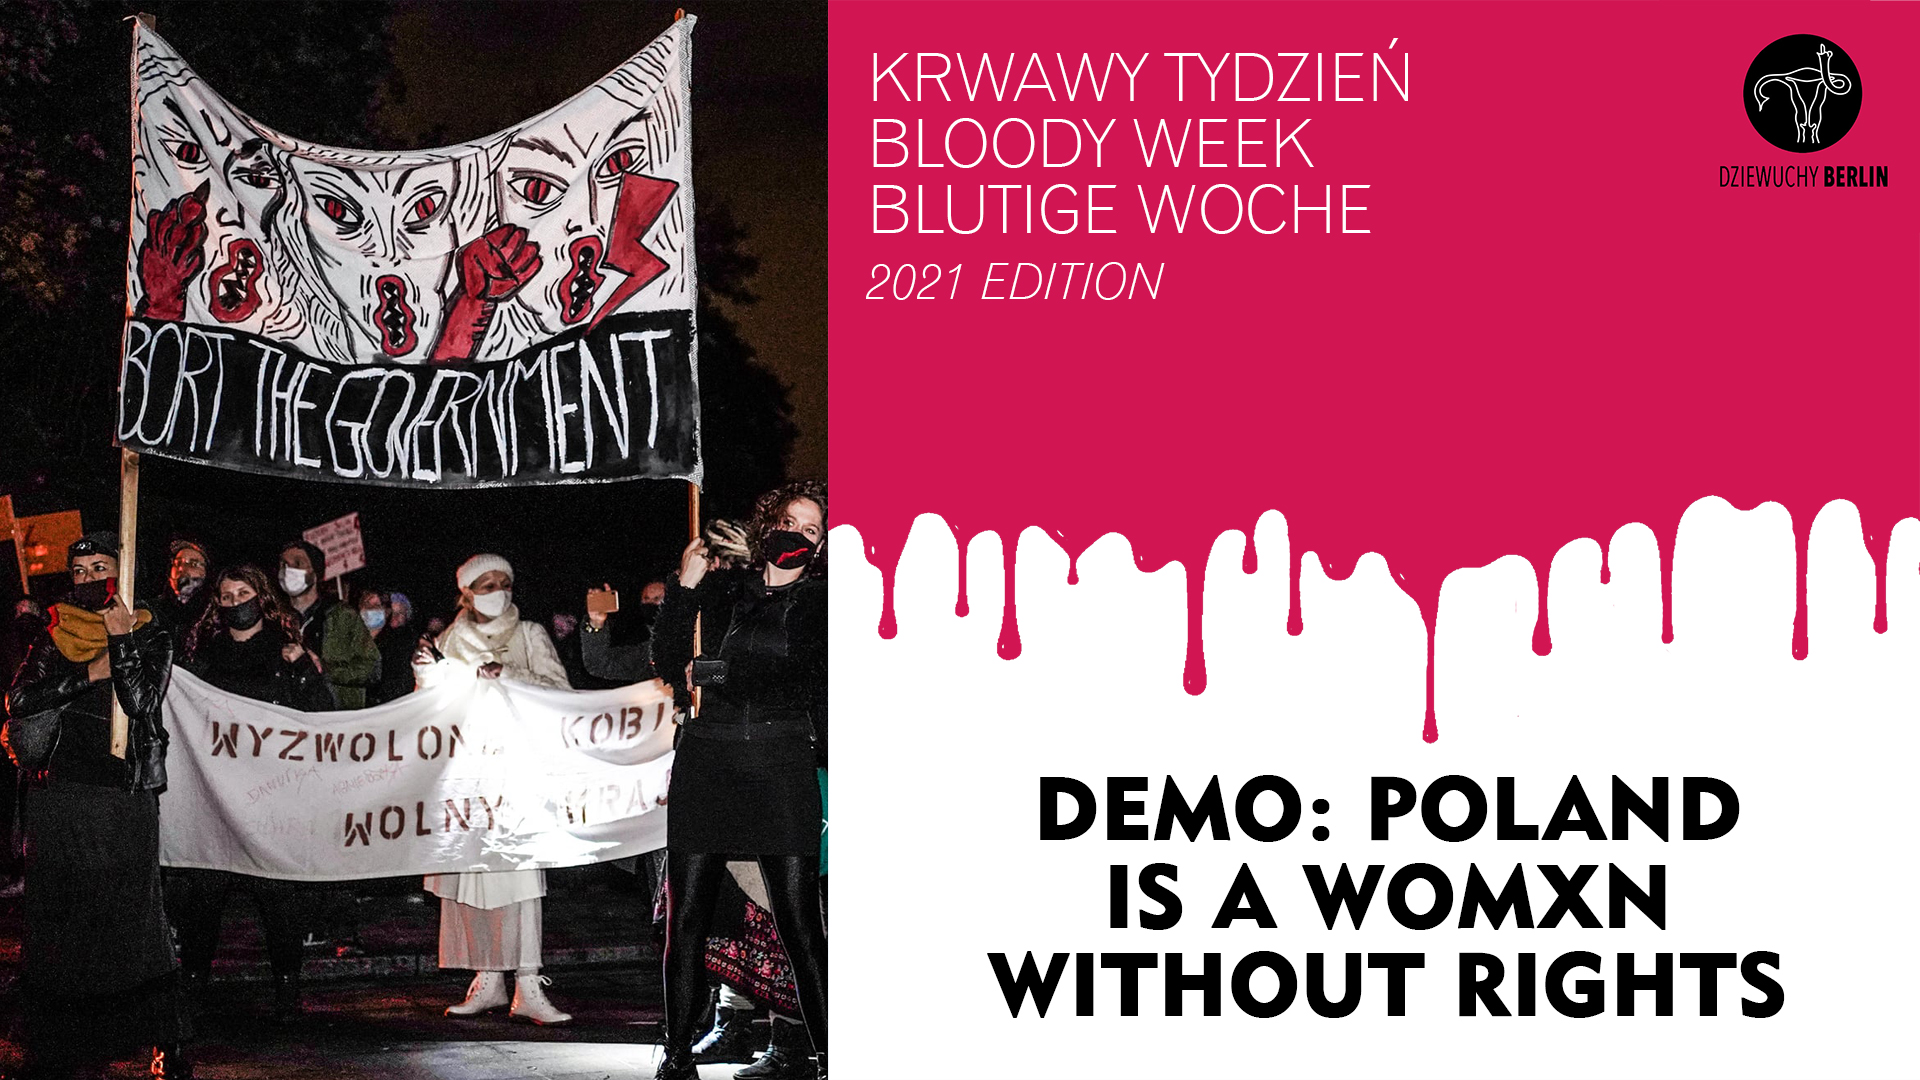 28.1.2021 Bloody Week | 2021 edition | Demo: in Solidarity with Polish Women